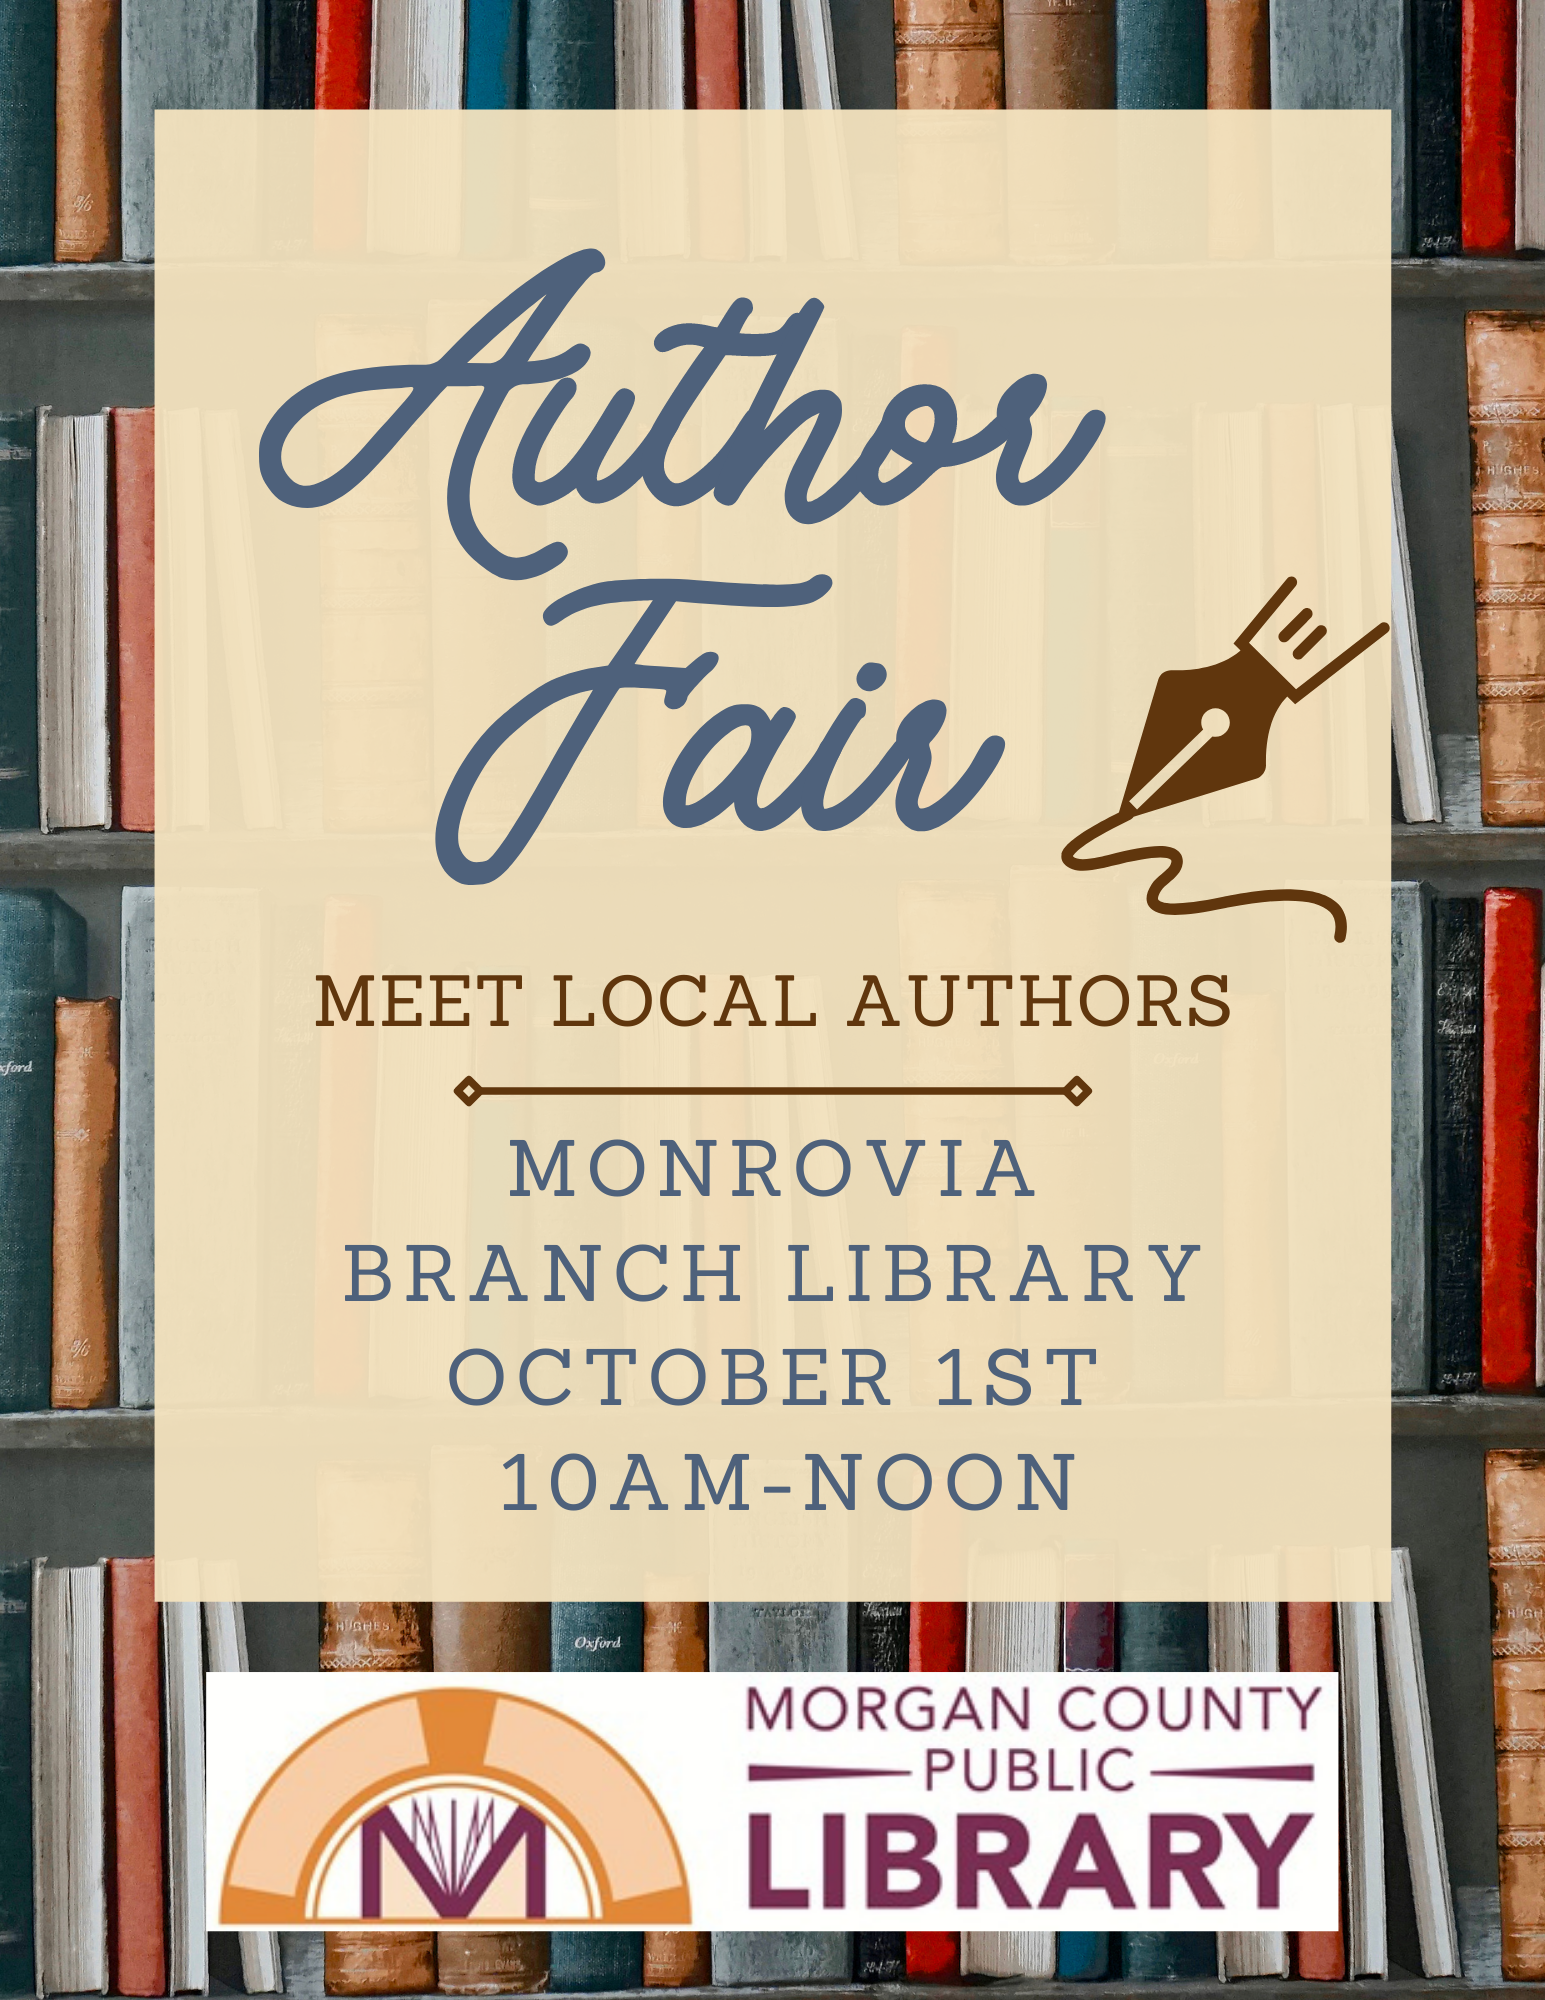 Author Fair. Meet local authors! Monrovia Branch Library October 1st 10AM-Noon